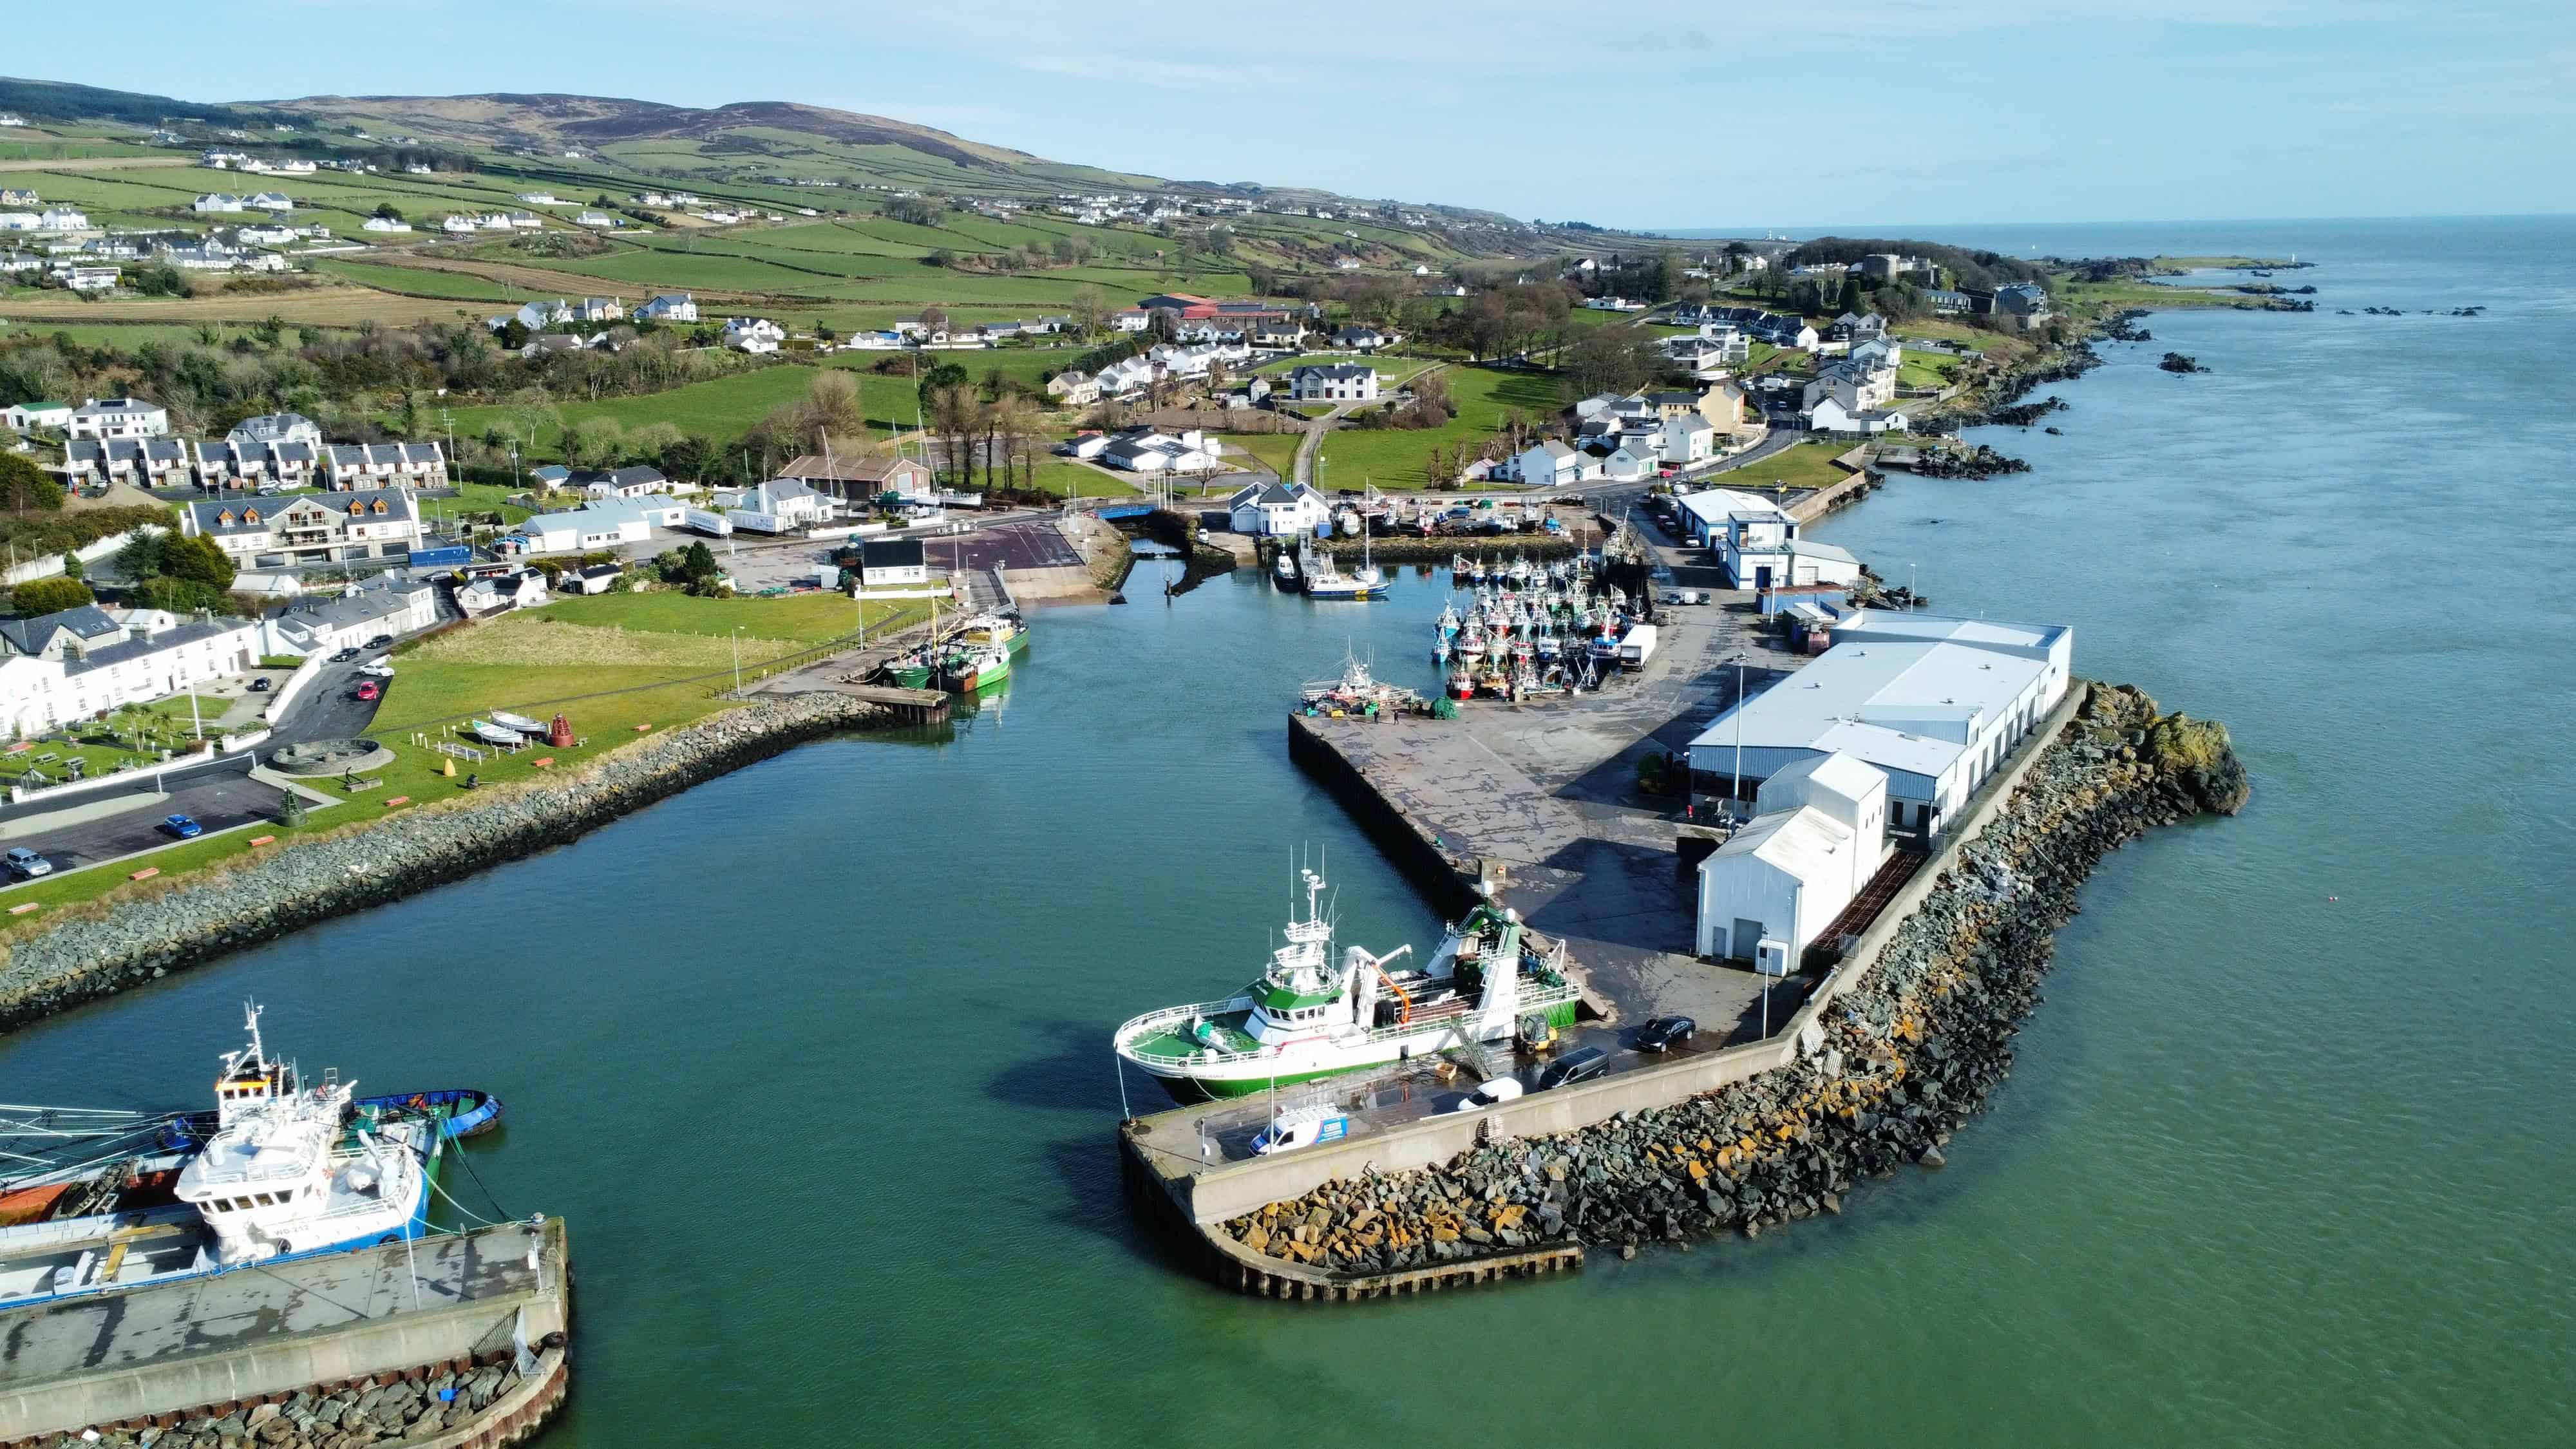 The bird&#039;s eye view of Greencastle Harbor with moored boats. Donegal, Ireland.